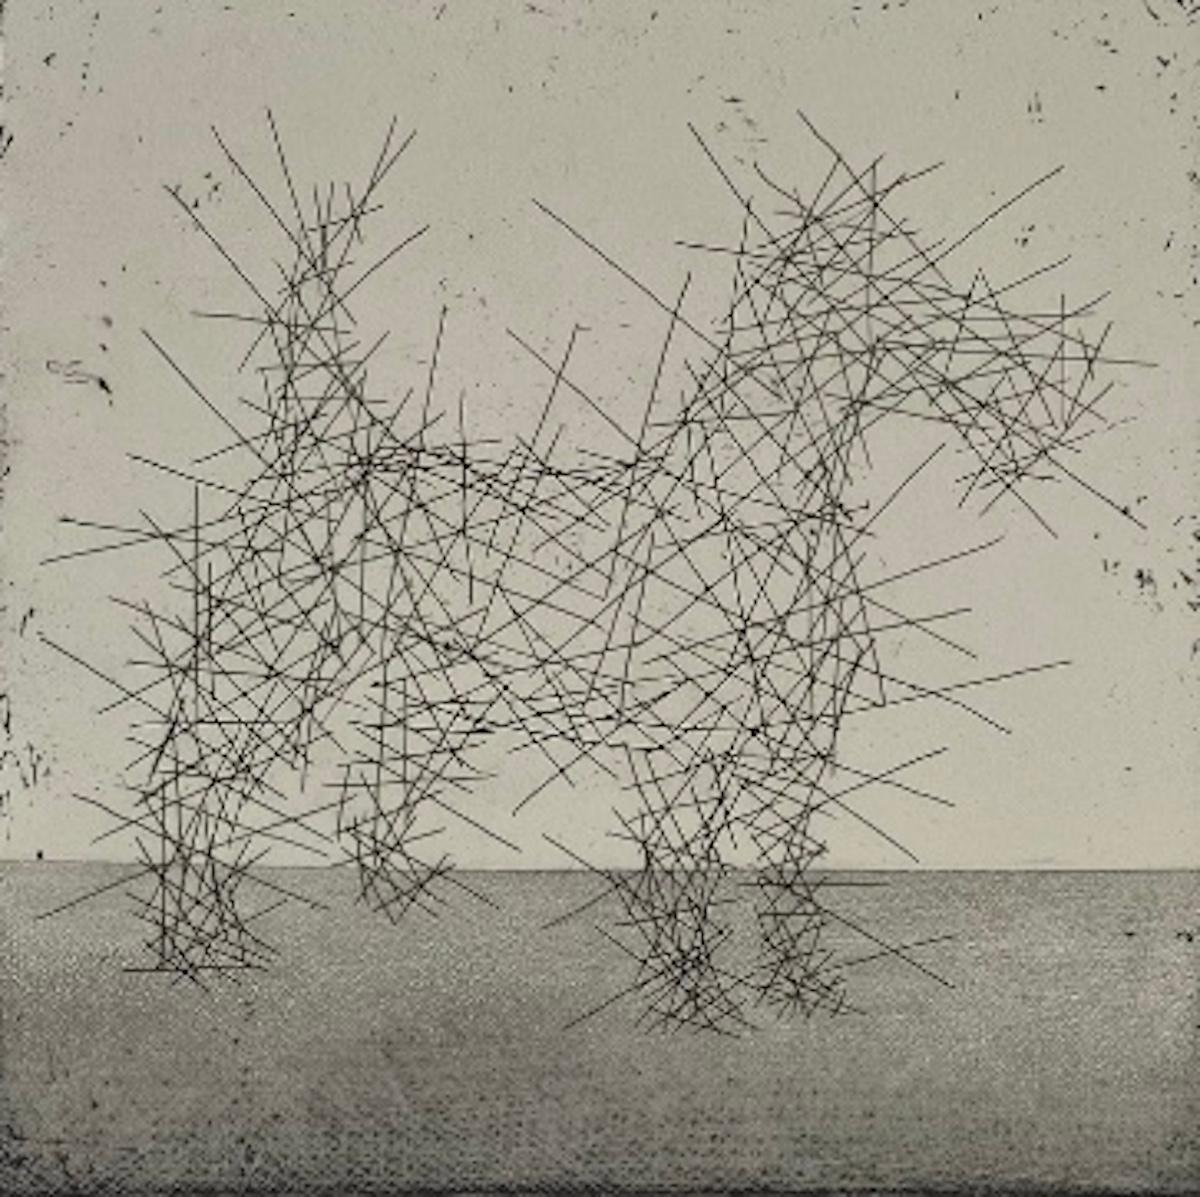 Gormley’s Dog II, Contemporary Animal Art, Limited Edition Print, Etching of Dog